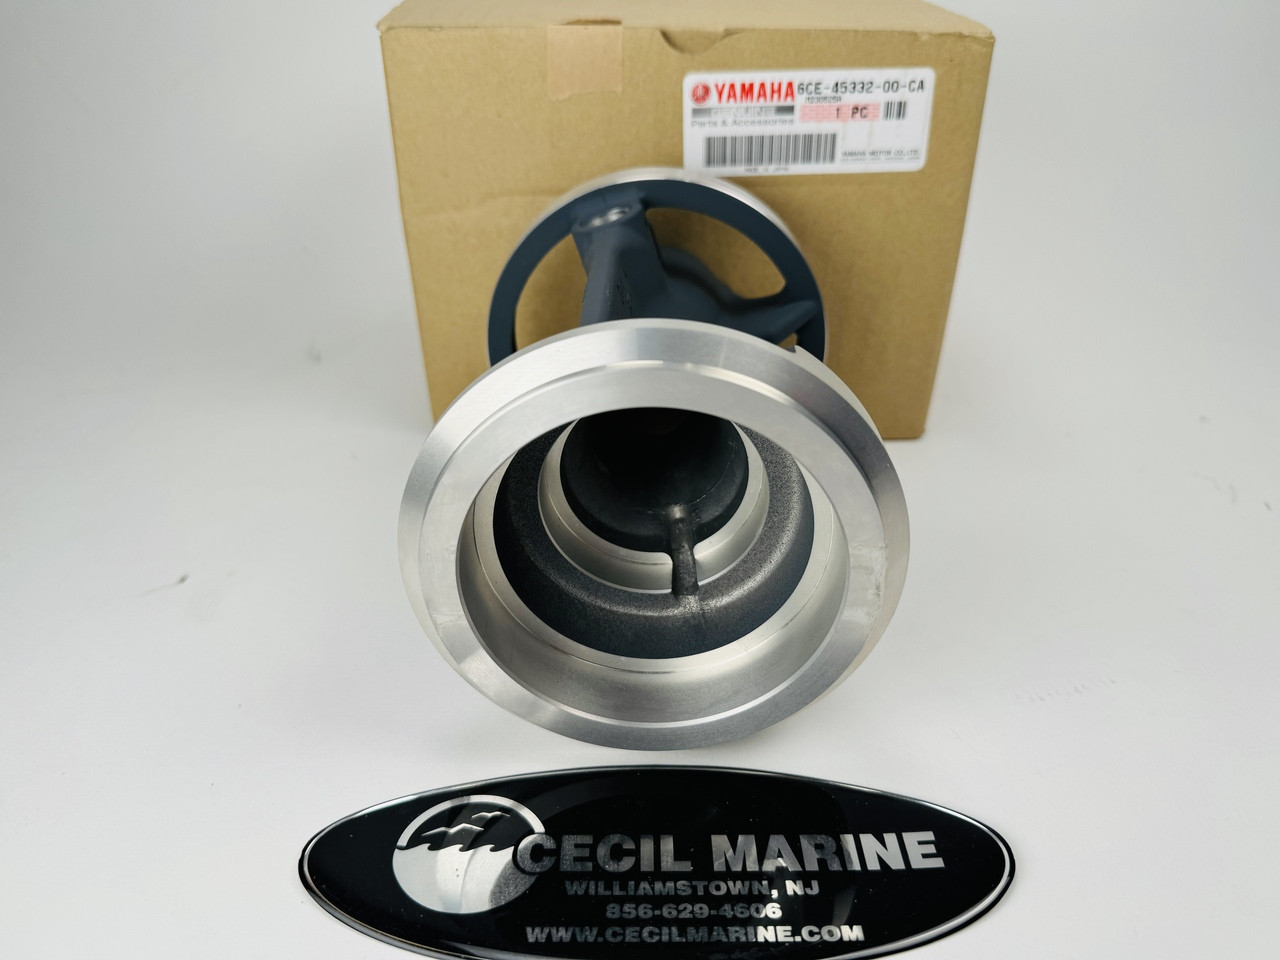 $159.99* GENUINE YAMAHA no tax* PROP SHAFT BEARING CARRIER 6CE-45332-00-CA  *In Stock & Ready To Ship!